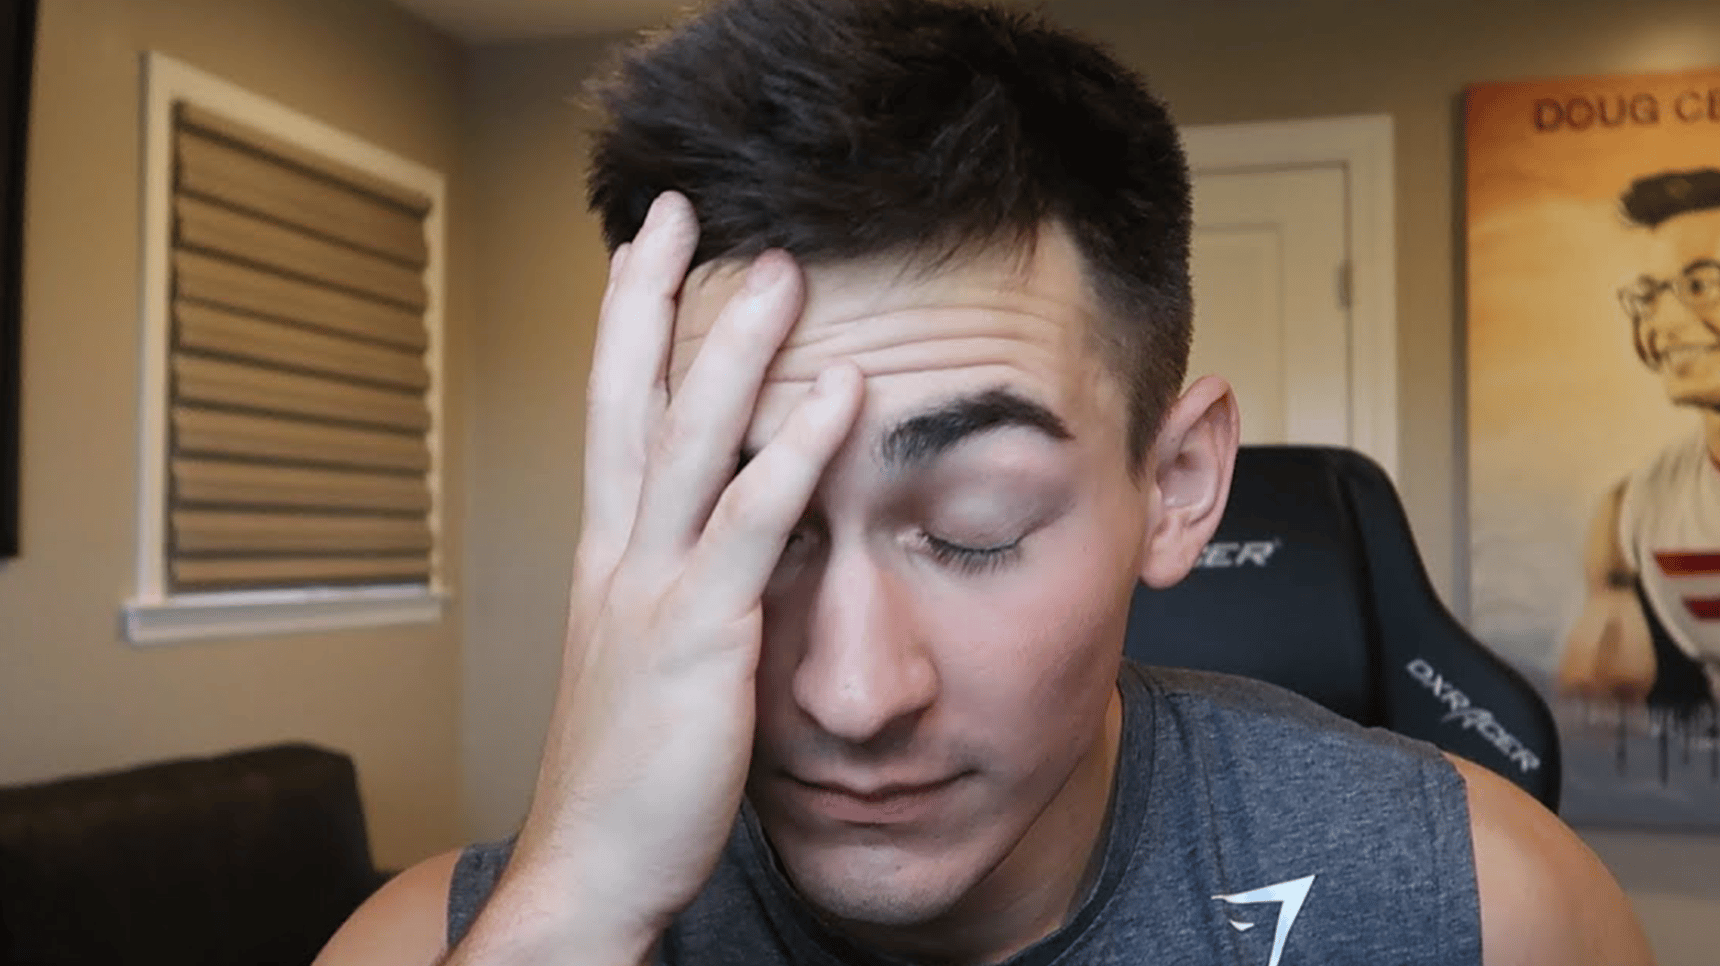 Call of Duty player Censor upset in front of the camera